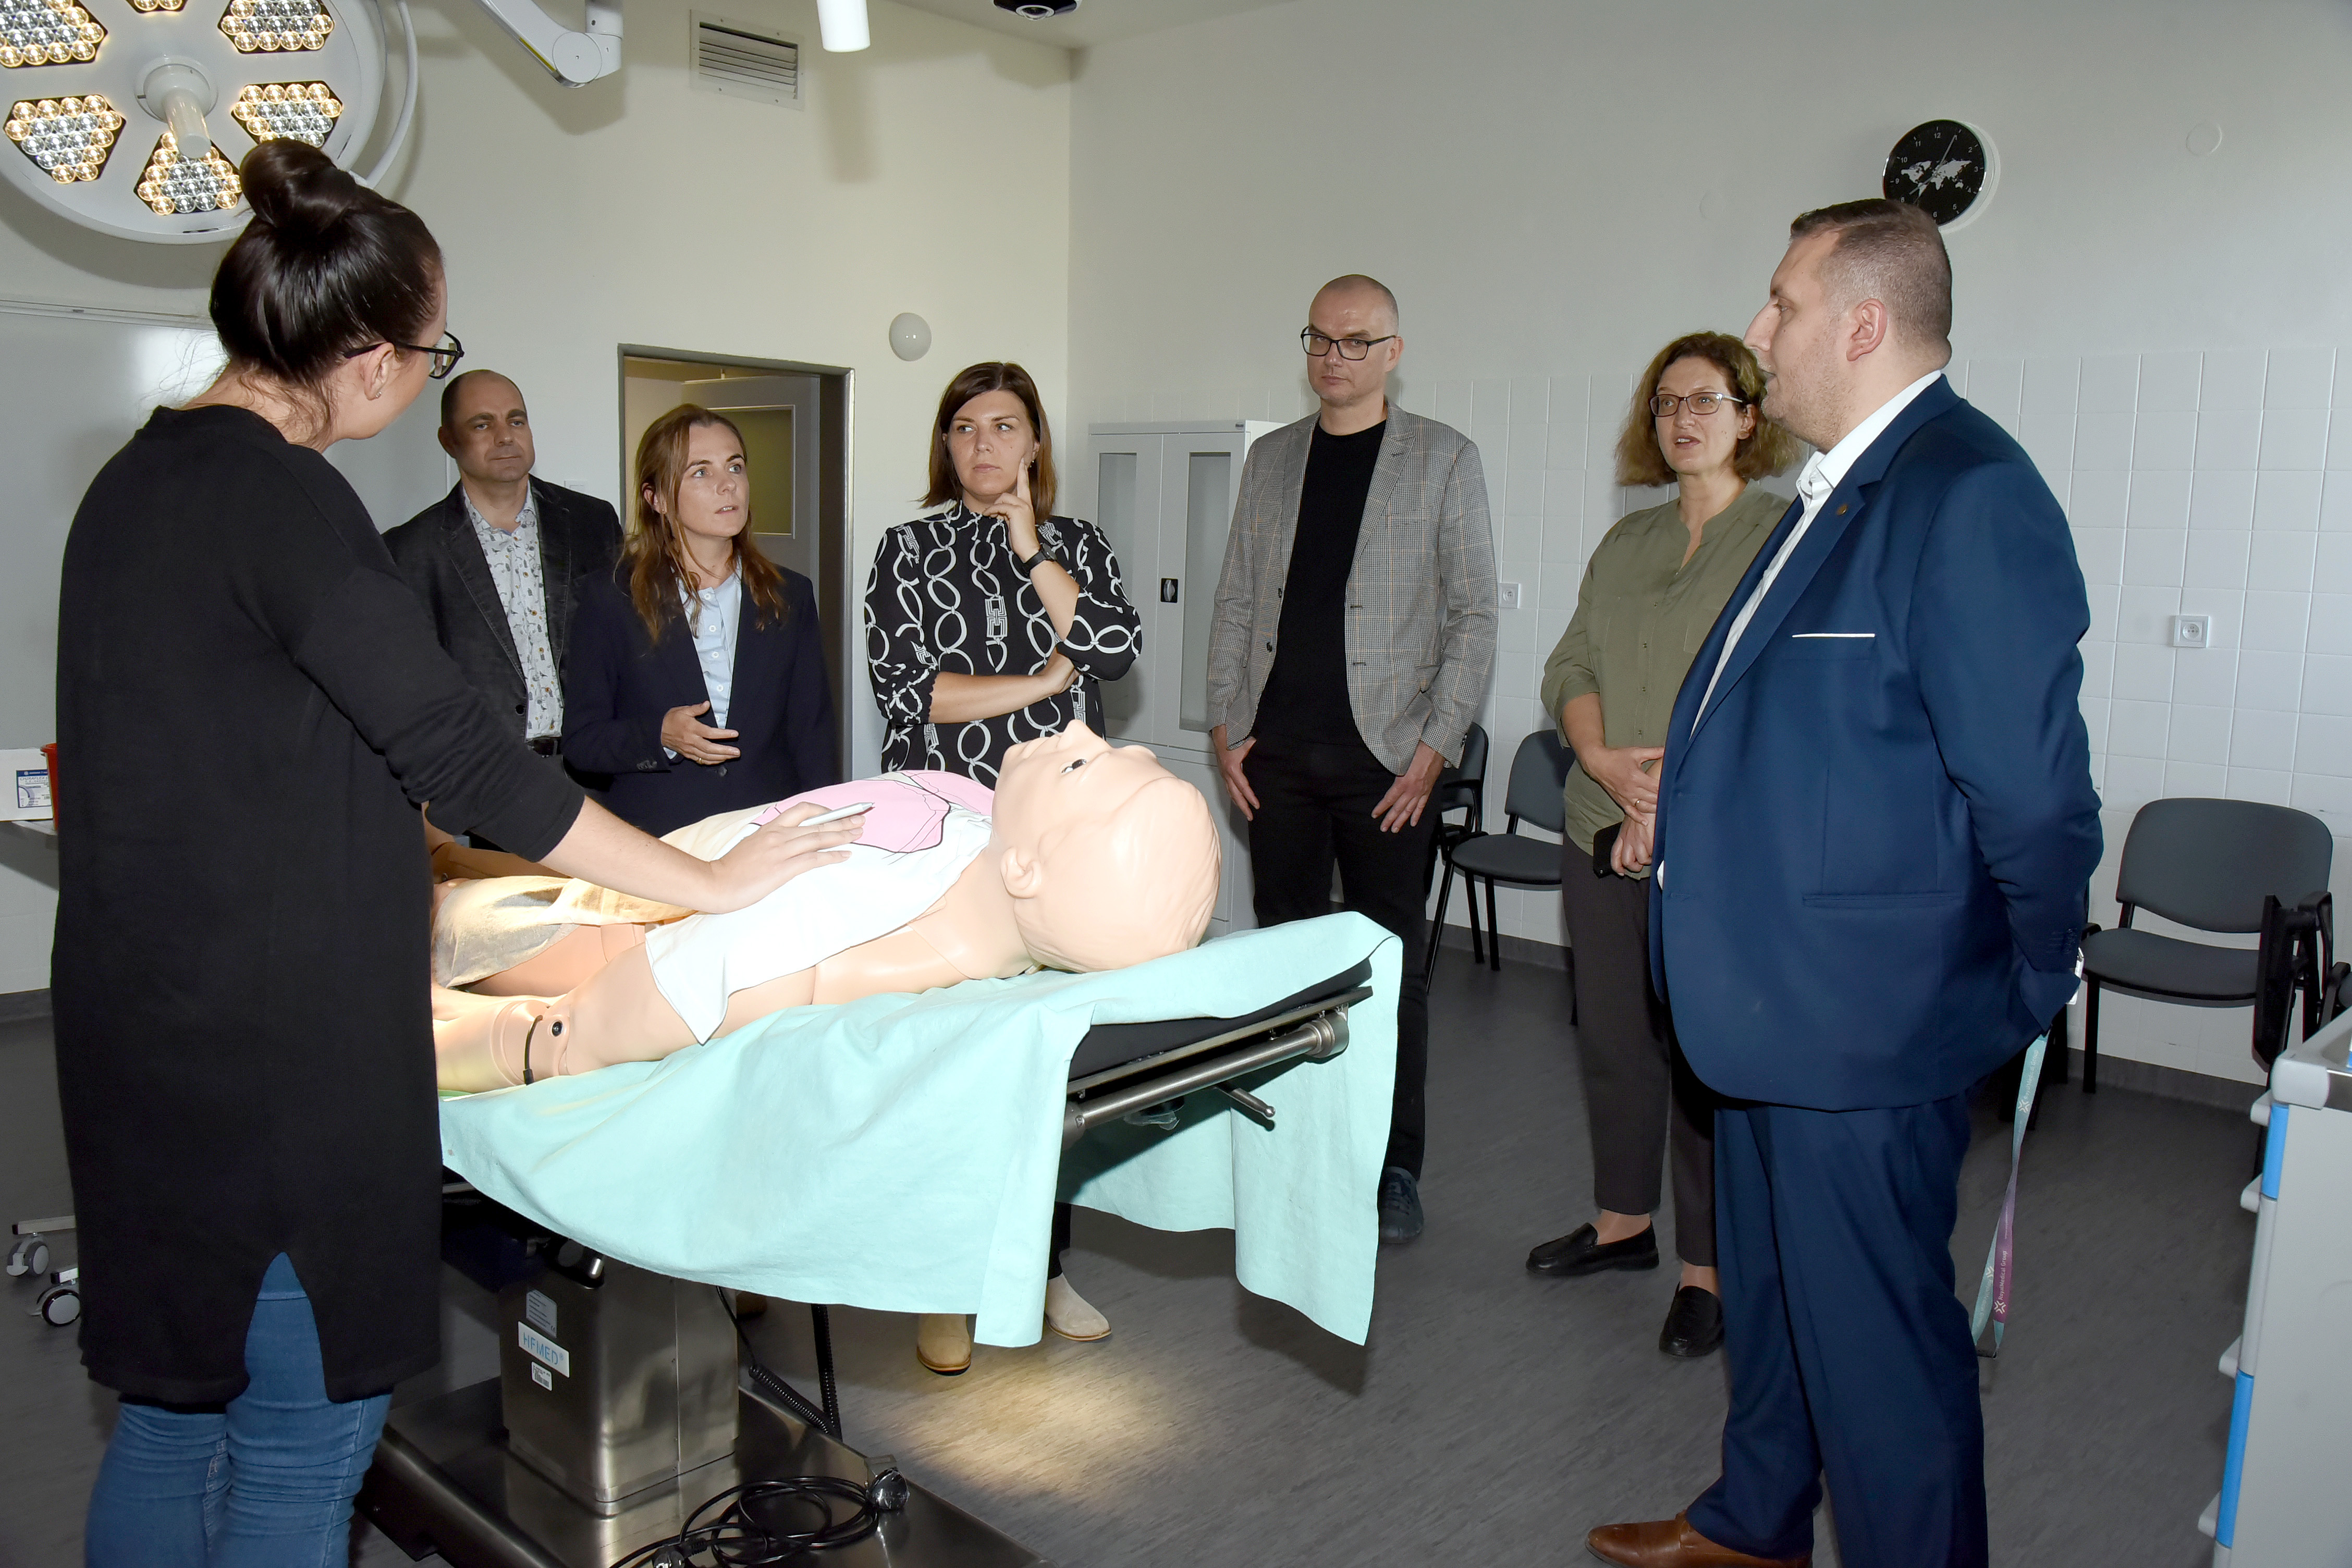 We welcomed representatives of the Faculty of Medicine of Lazarski University